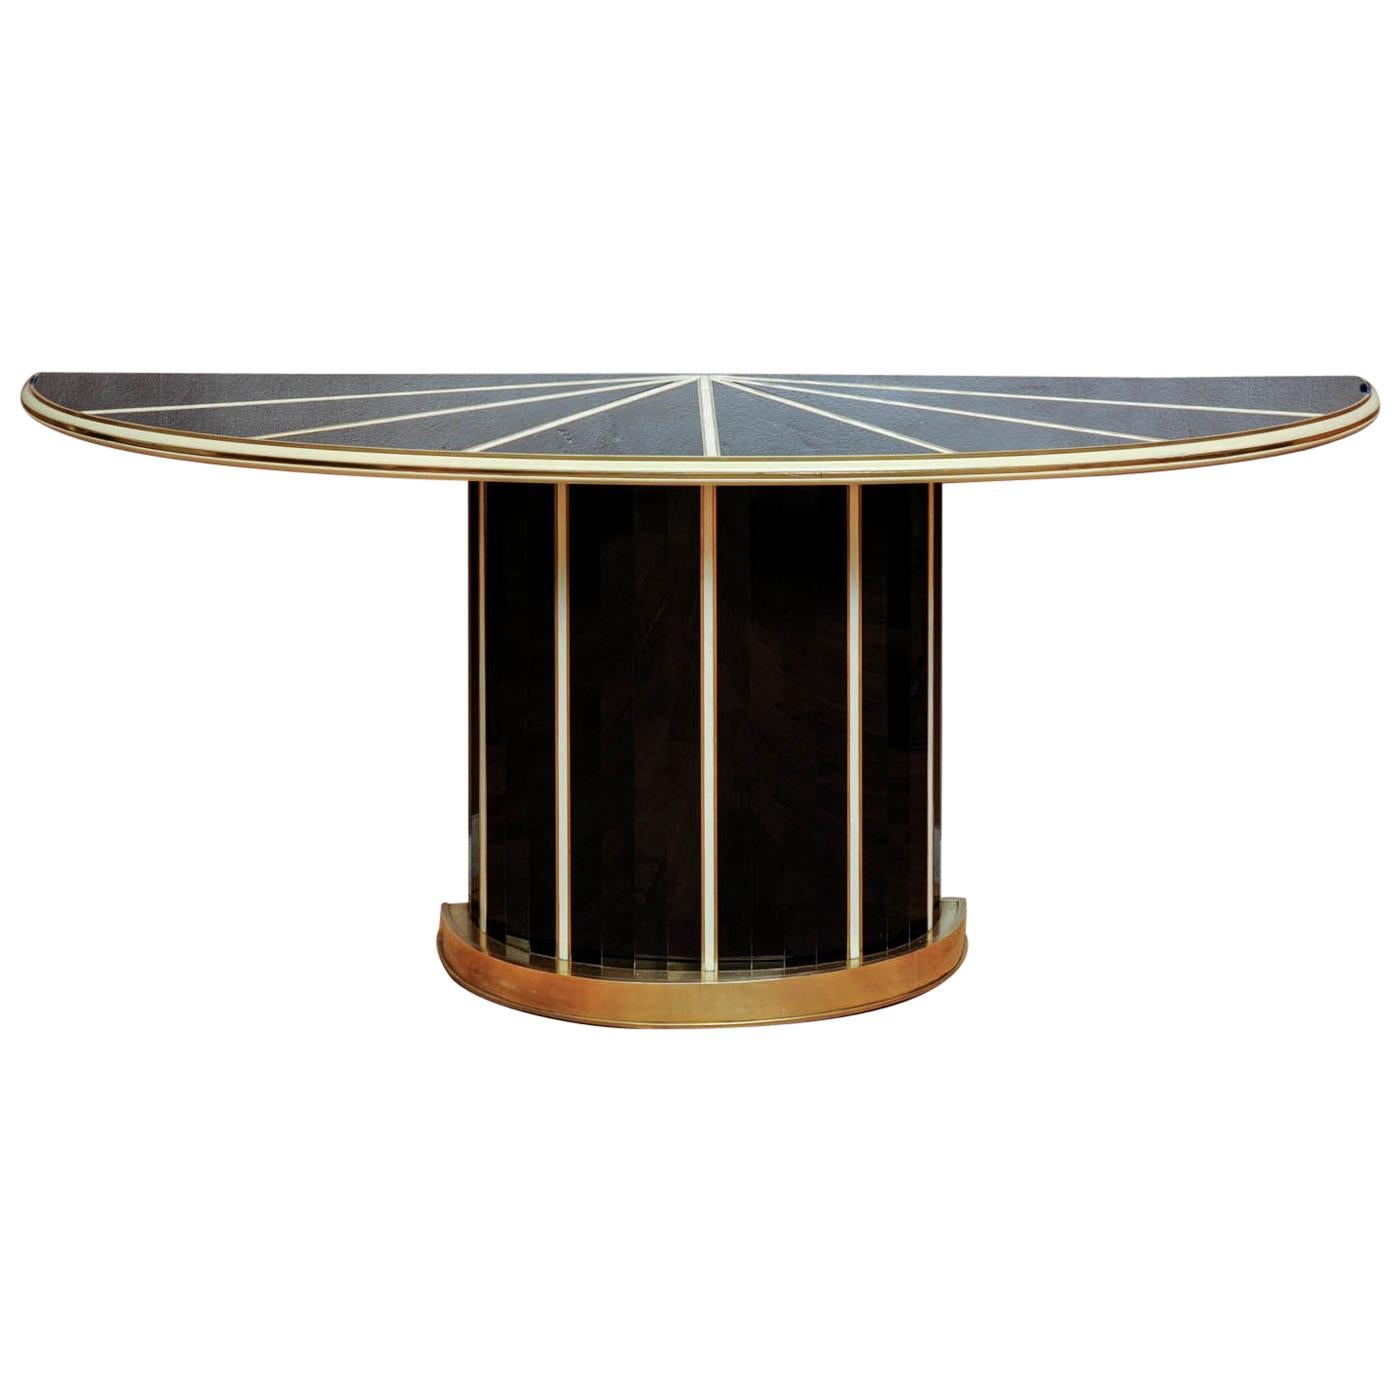 Pair of Console Tables in Tinted Black and Cream Glass